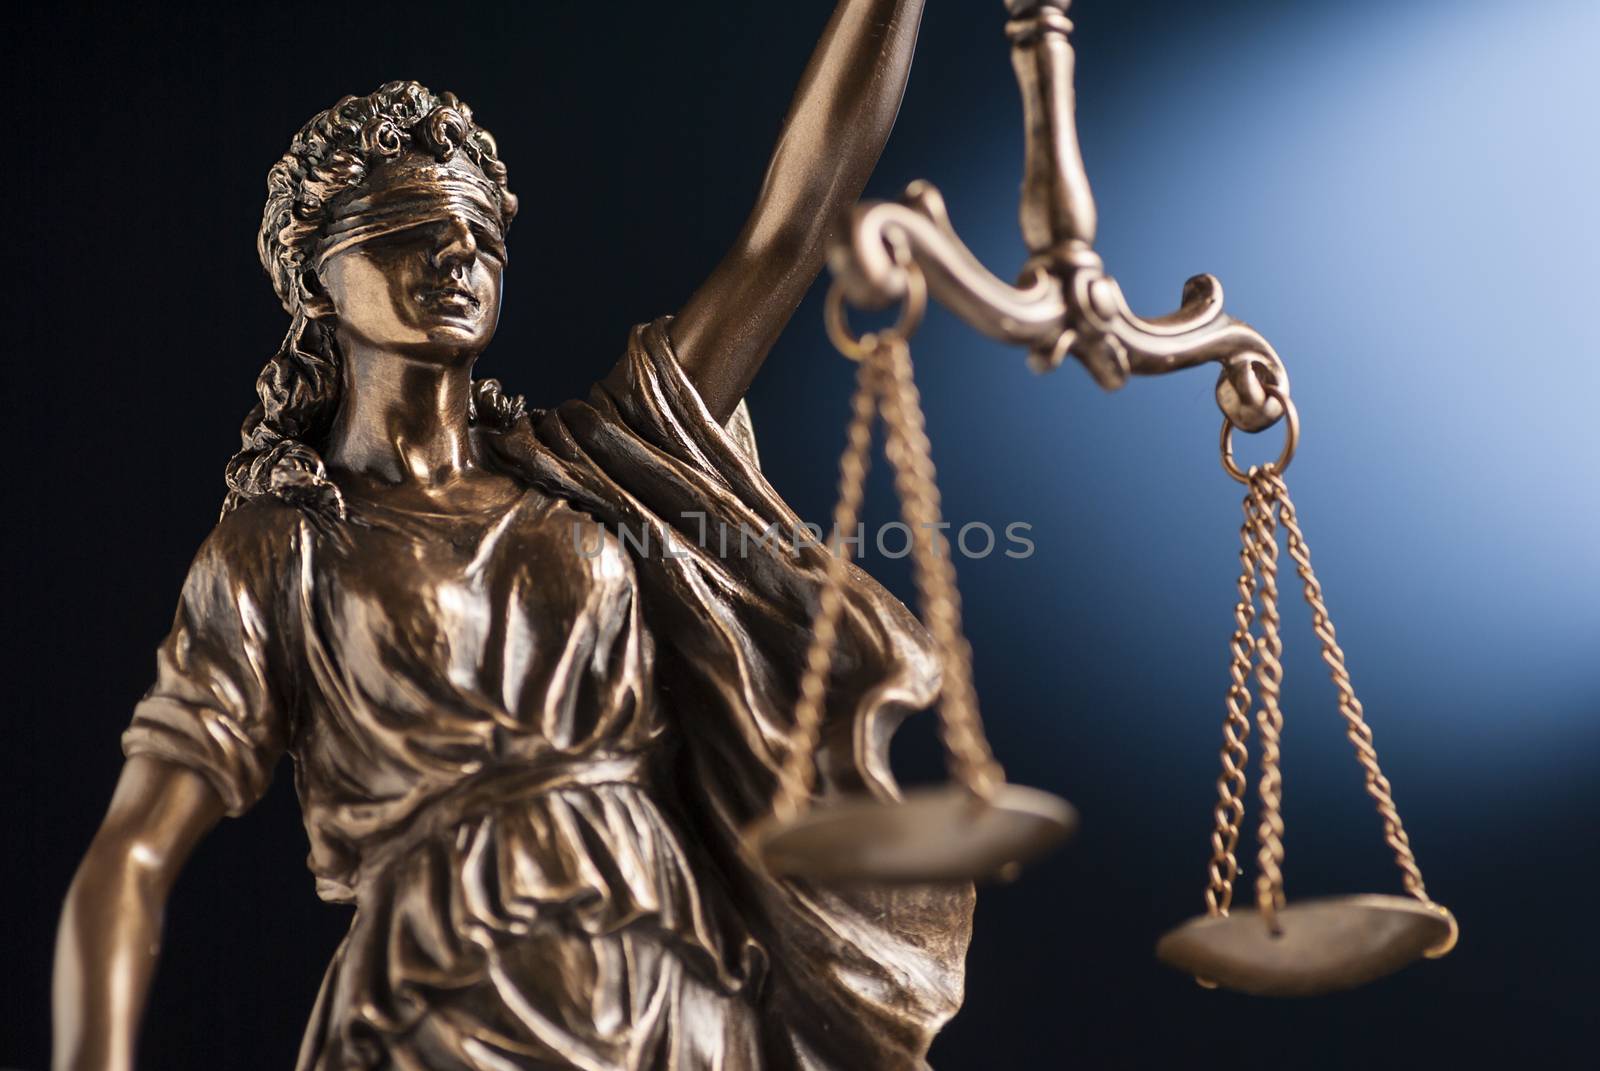 Bronze statue of Lady Justice wearing a blindfold holding up scales representing law and order over a blue background with copy space